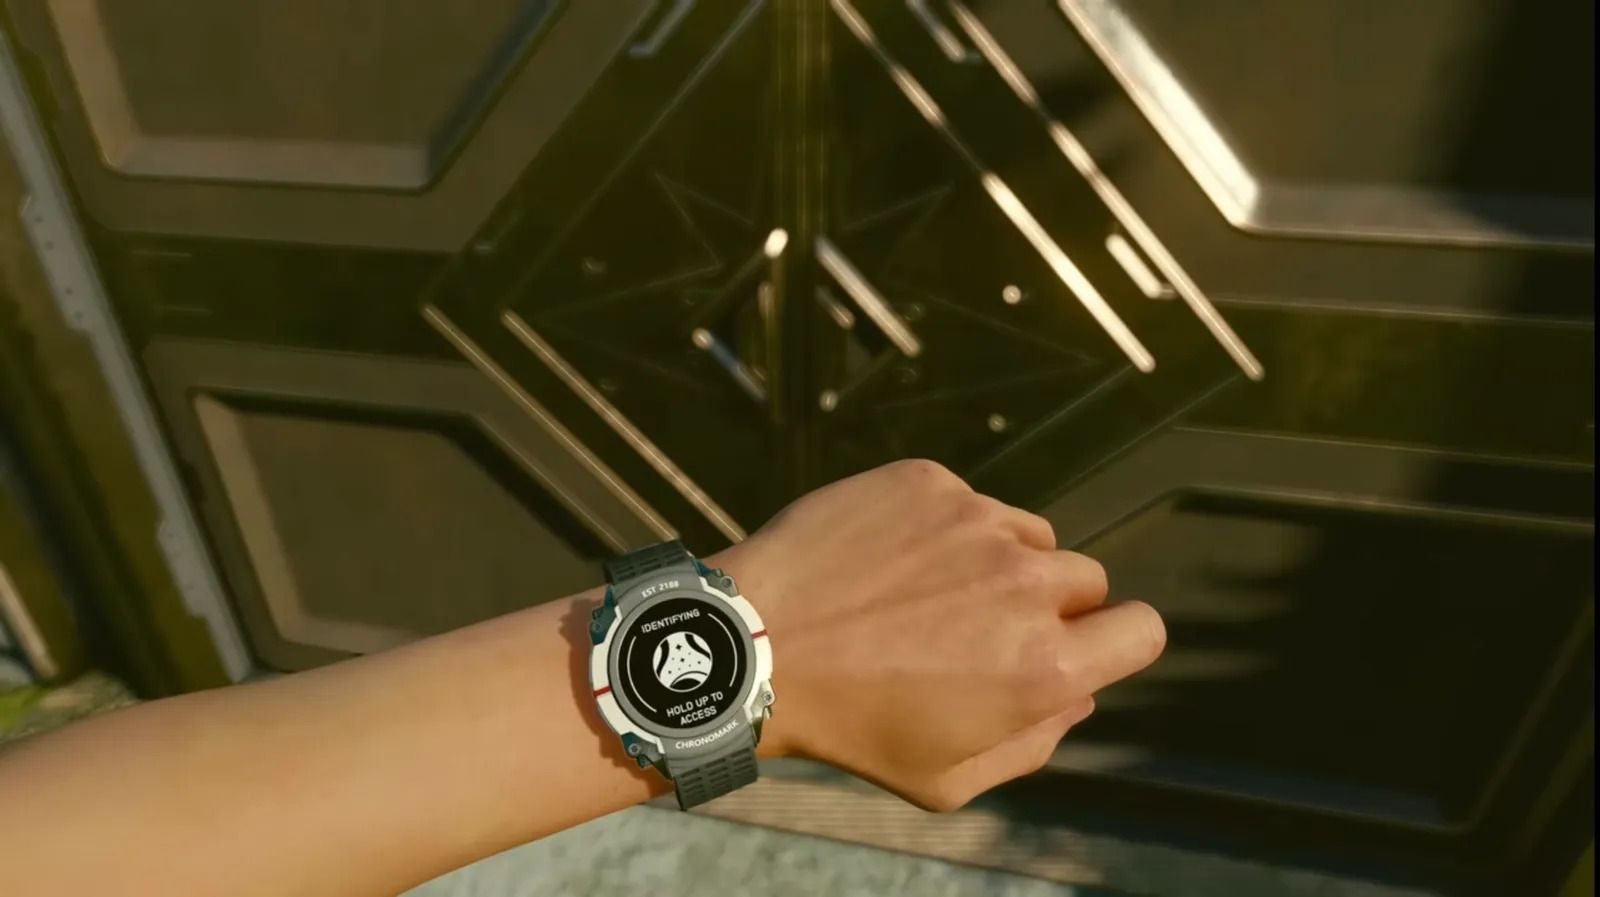 The chronomark watch is shown on the players wris